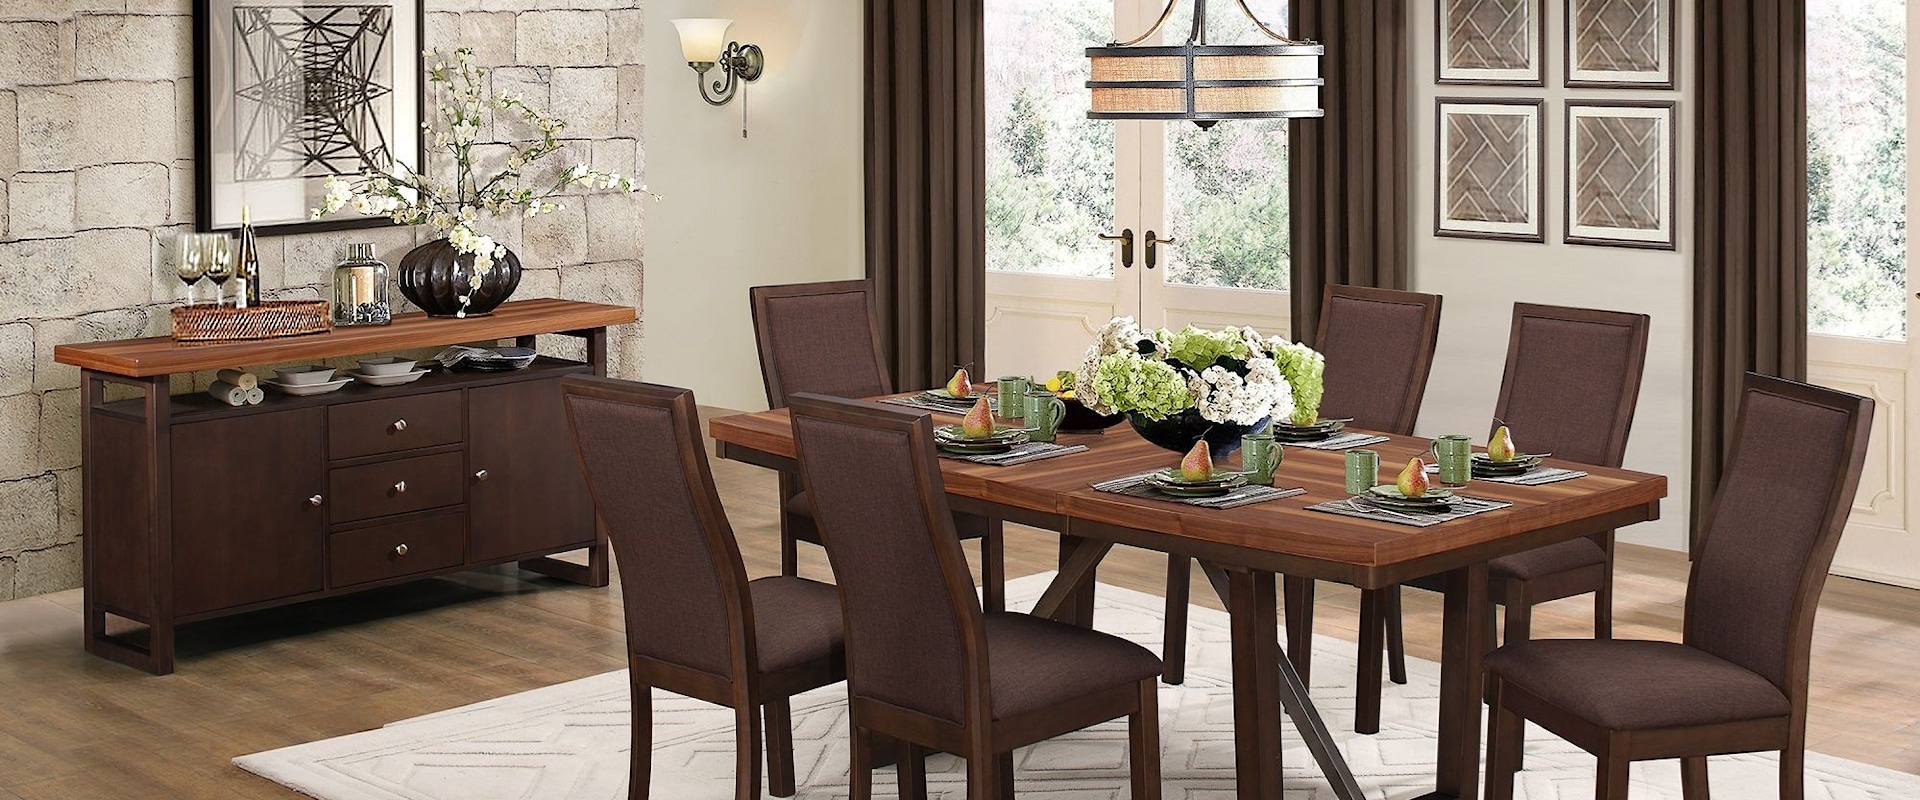 Contemporary Dining Room Group with Self-Storing Table Leaf